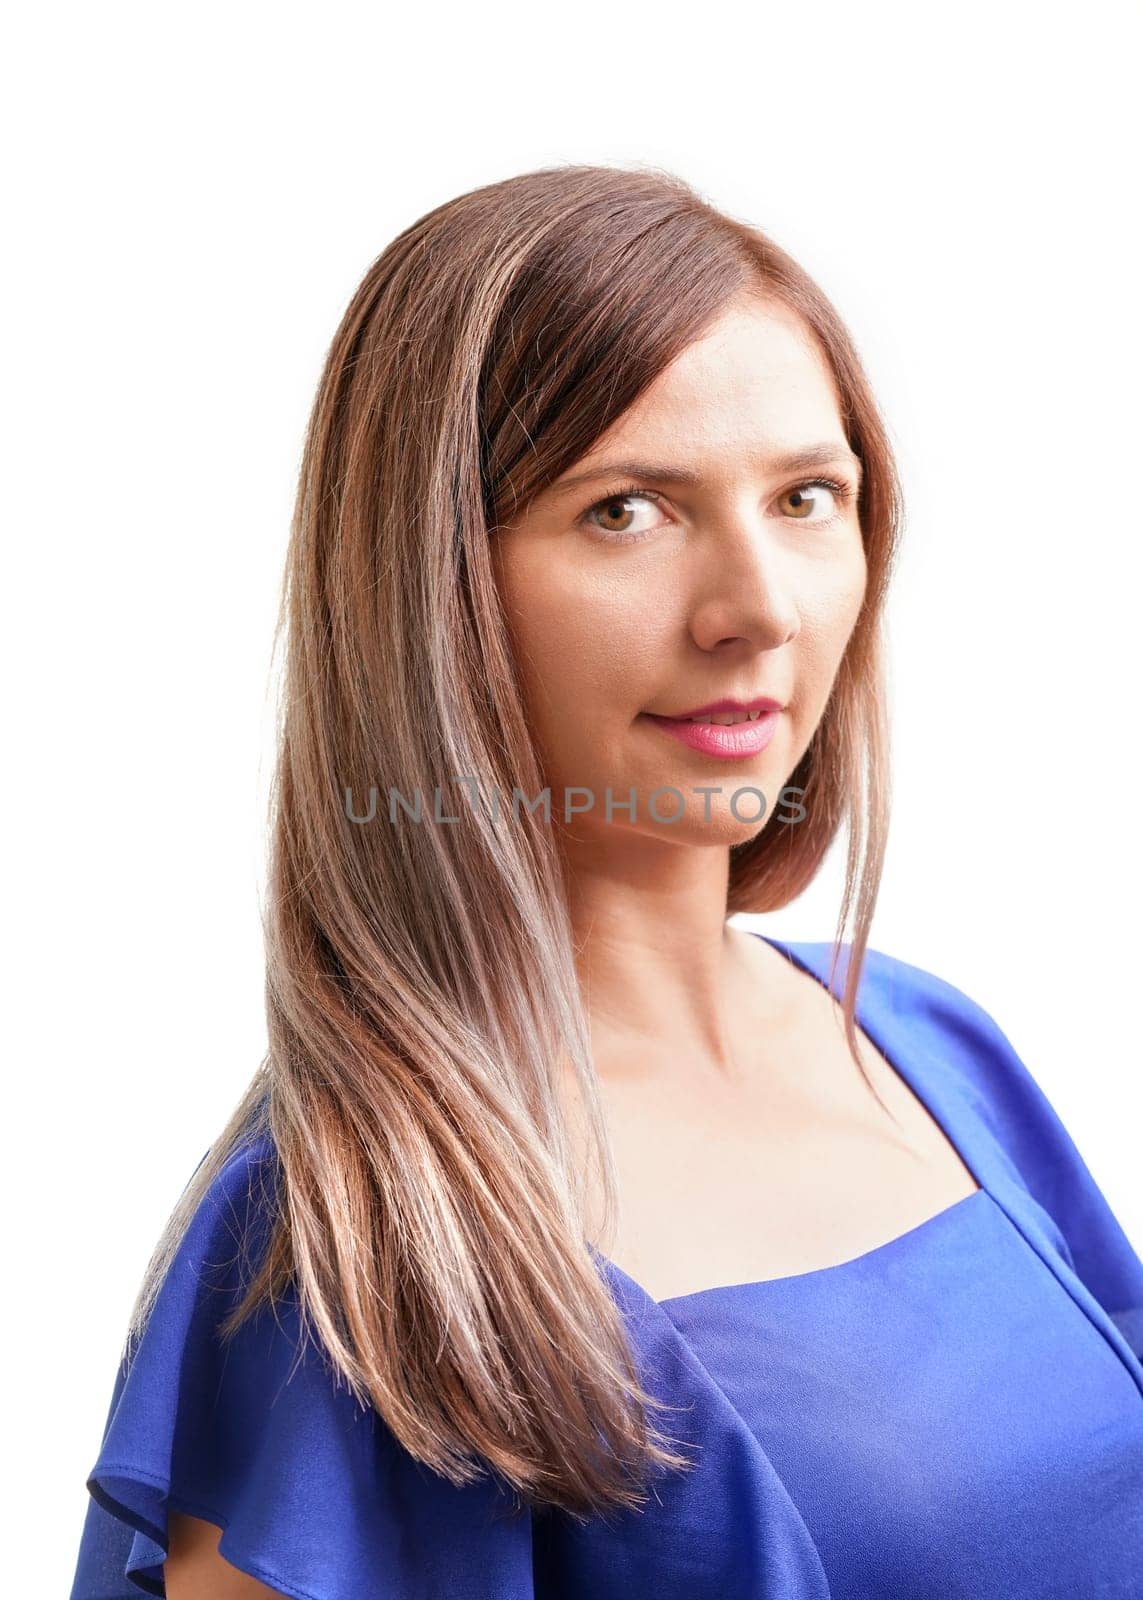 Young woman with long hair, in blue dress, studio portrait from shoulders up by Ivanko